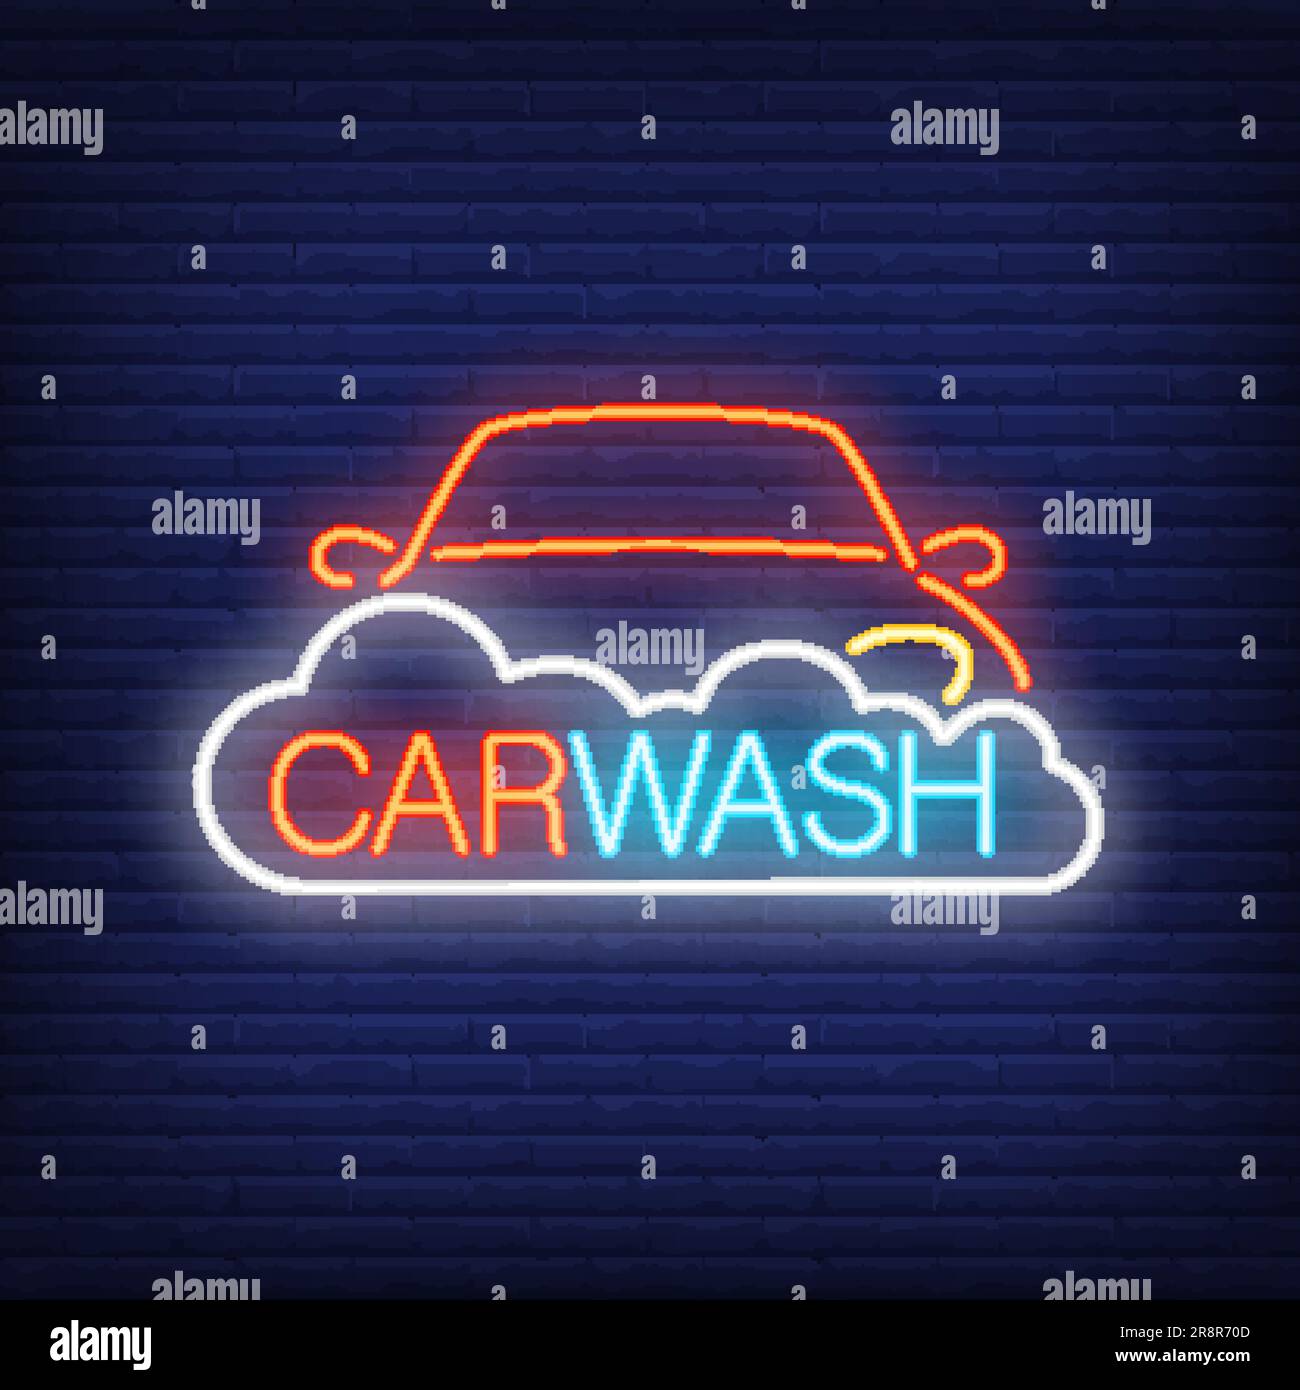 Black dirty car in white soap foam at car wash service station 7485971  Stock Photo at Vecteezy